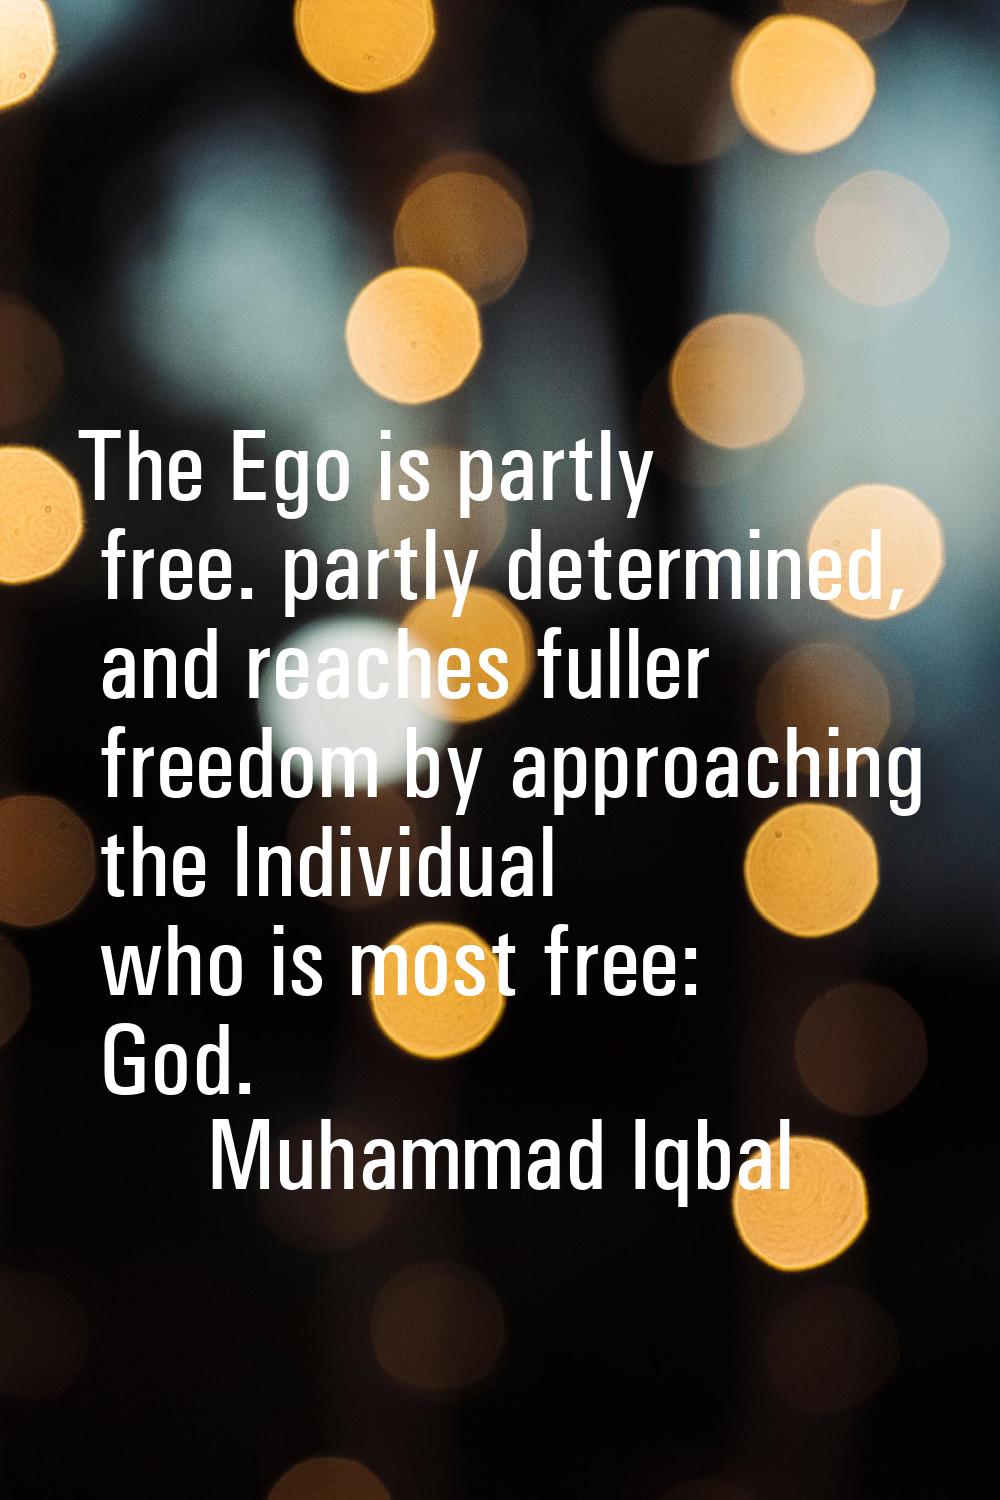 The Ego is partly free. partly determined, and reaches fuller freedom by approaching the Individual